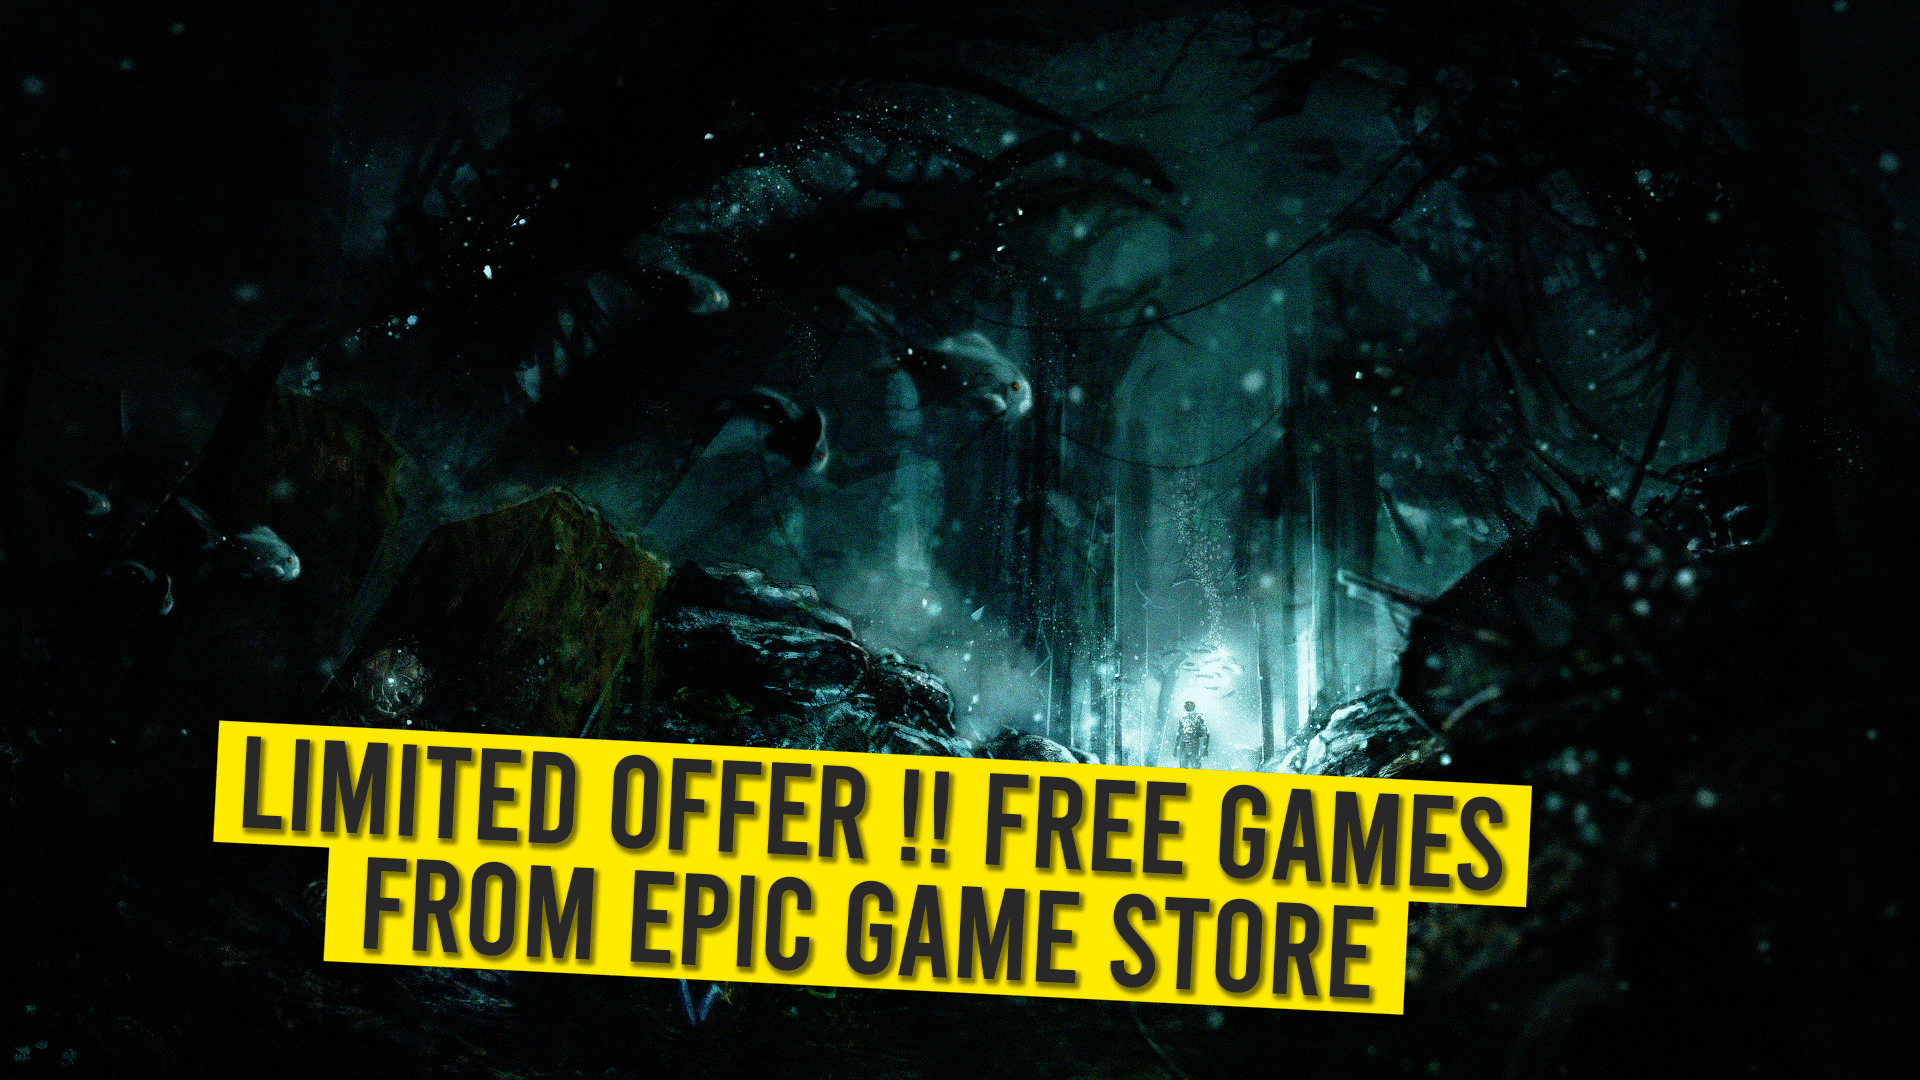 Free games from Epic game store